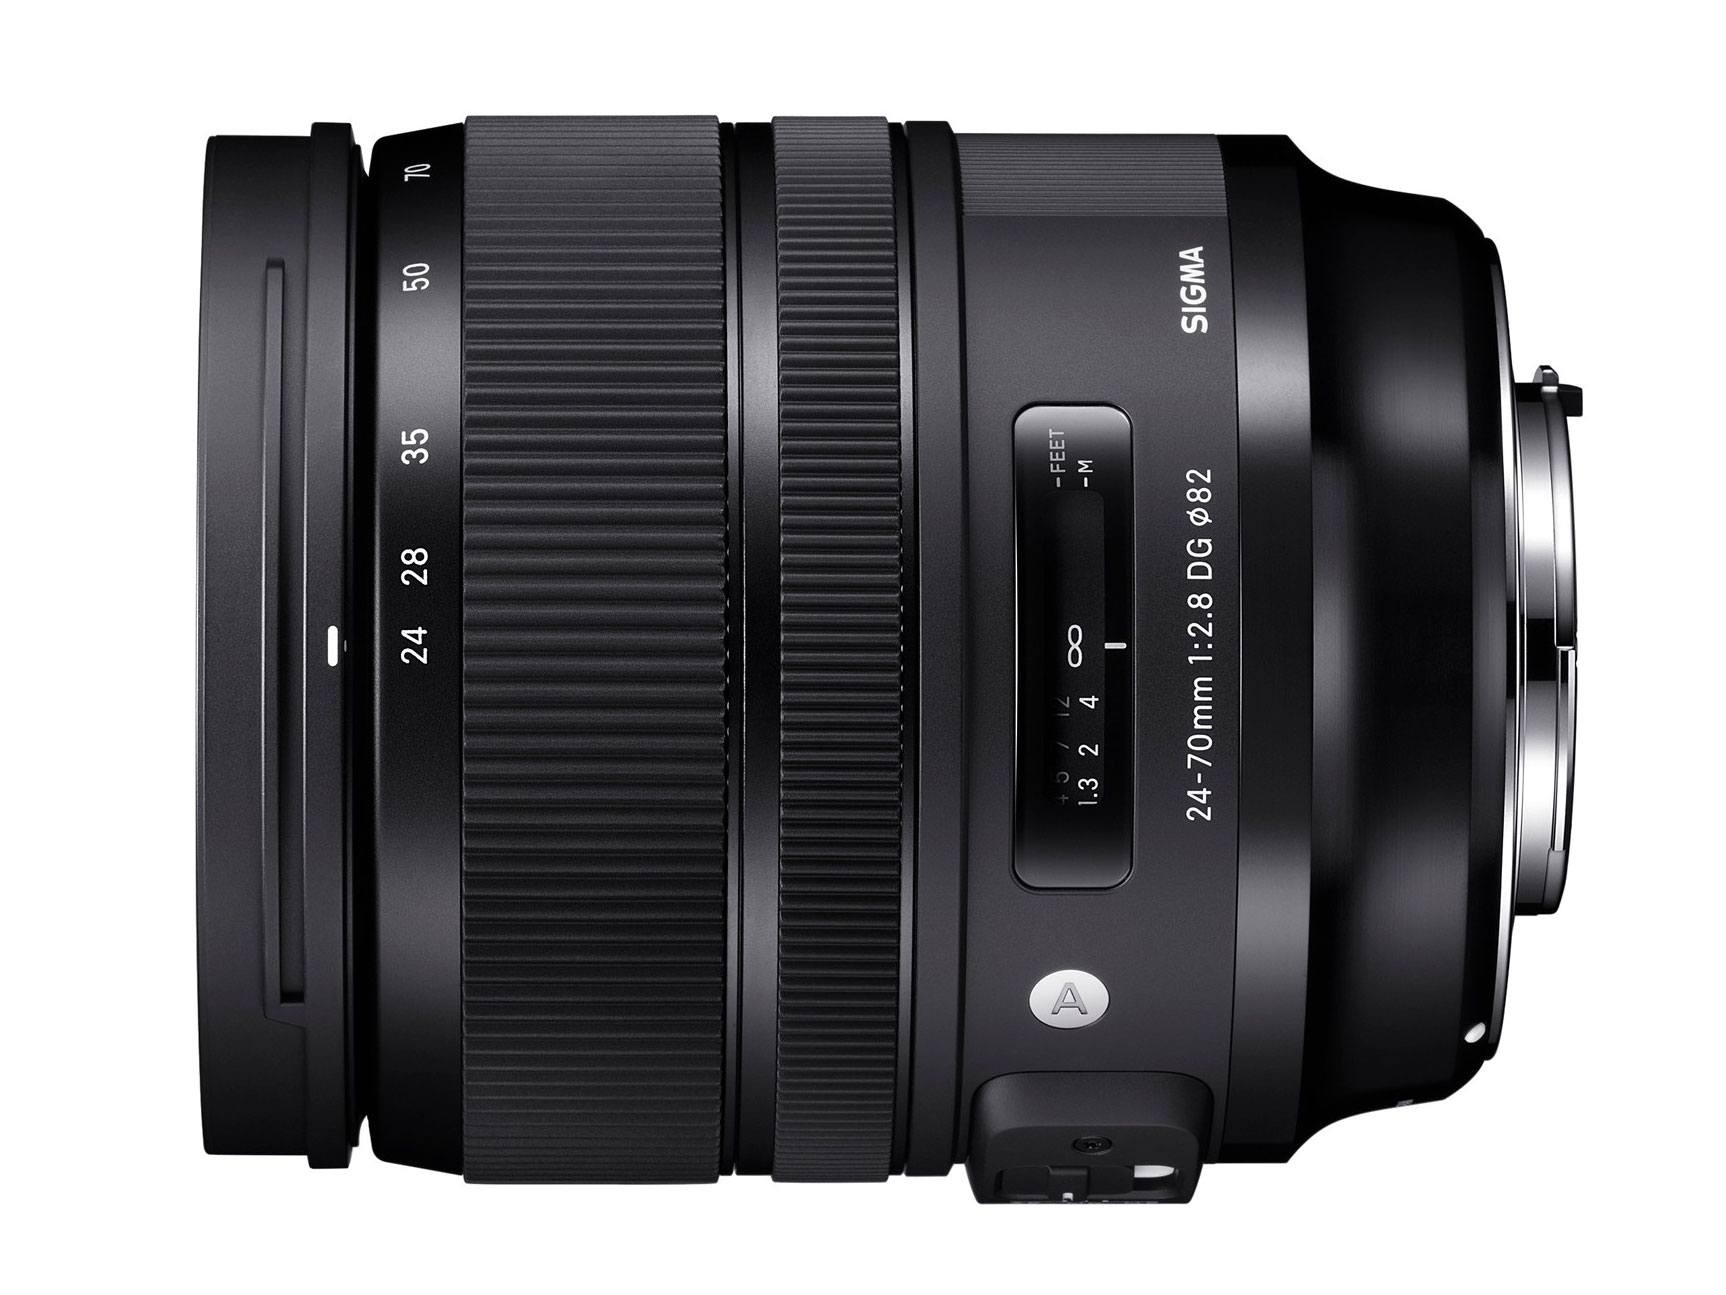 Sigma 24-70mm F/2.8 DG OS HSM A for Nikon review: Good value 